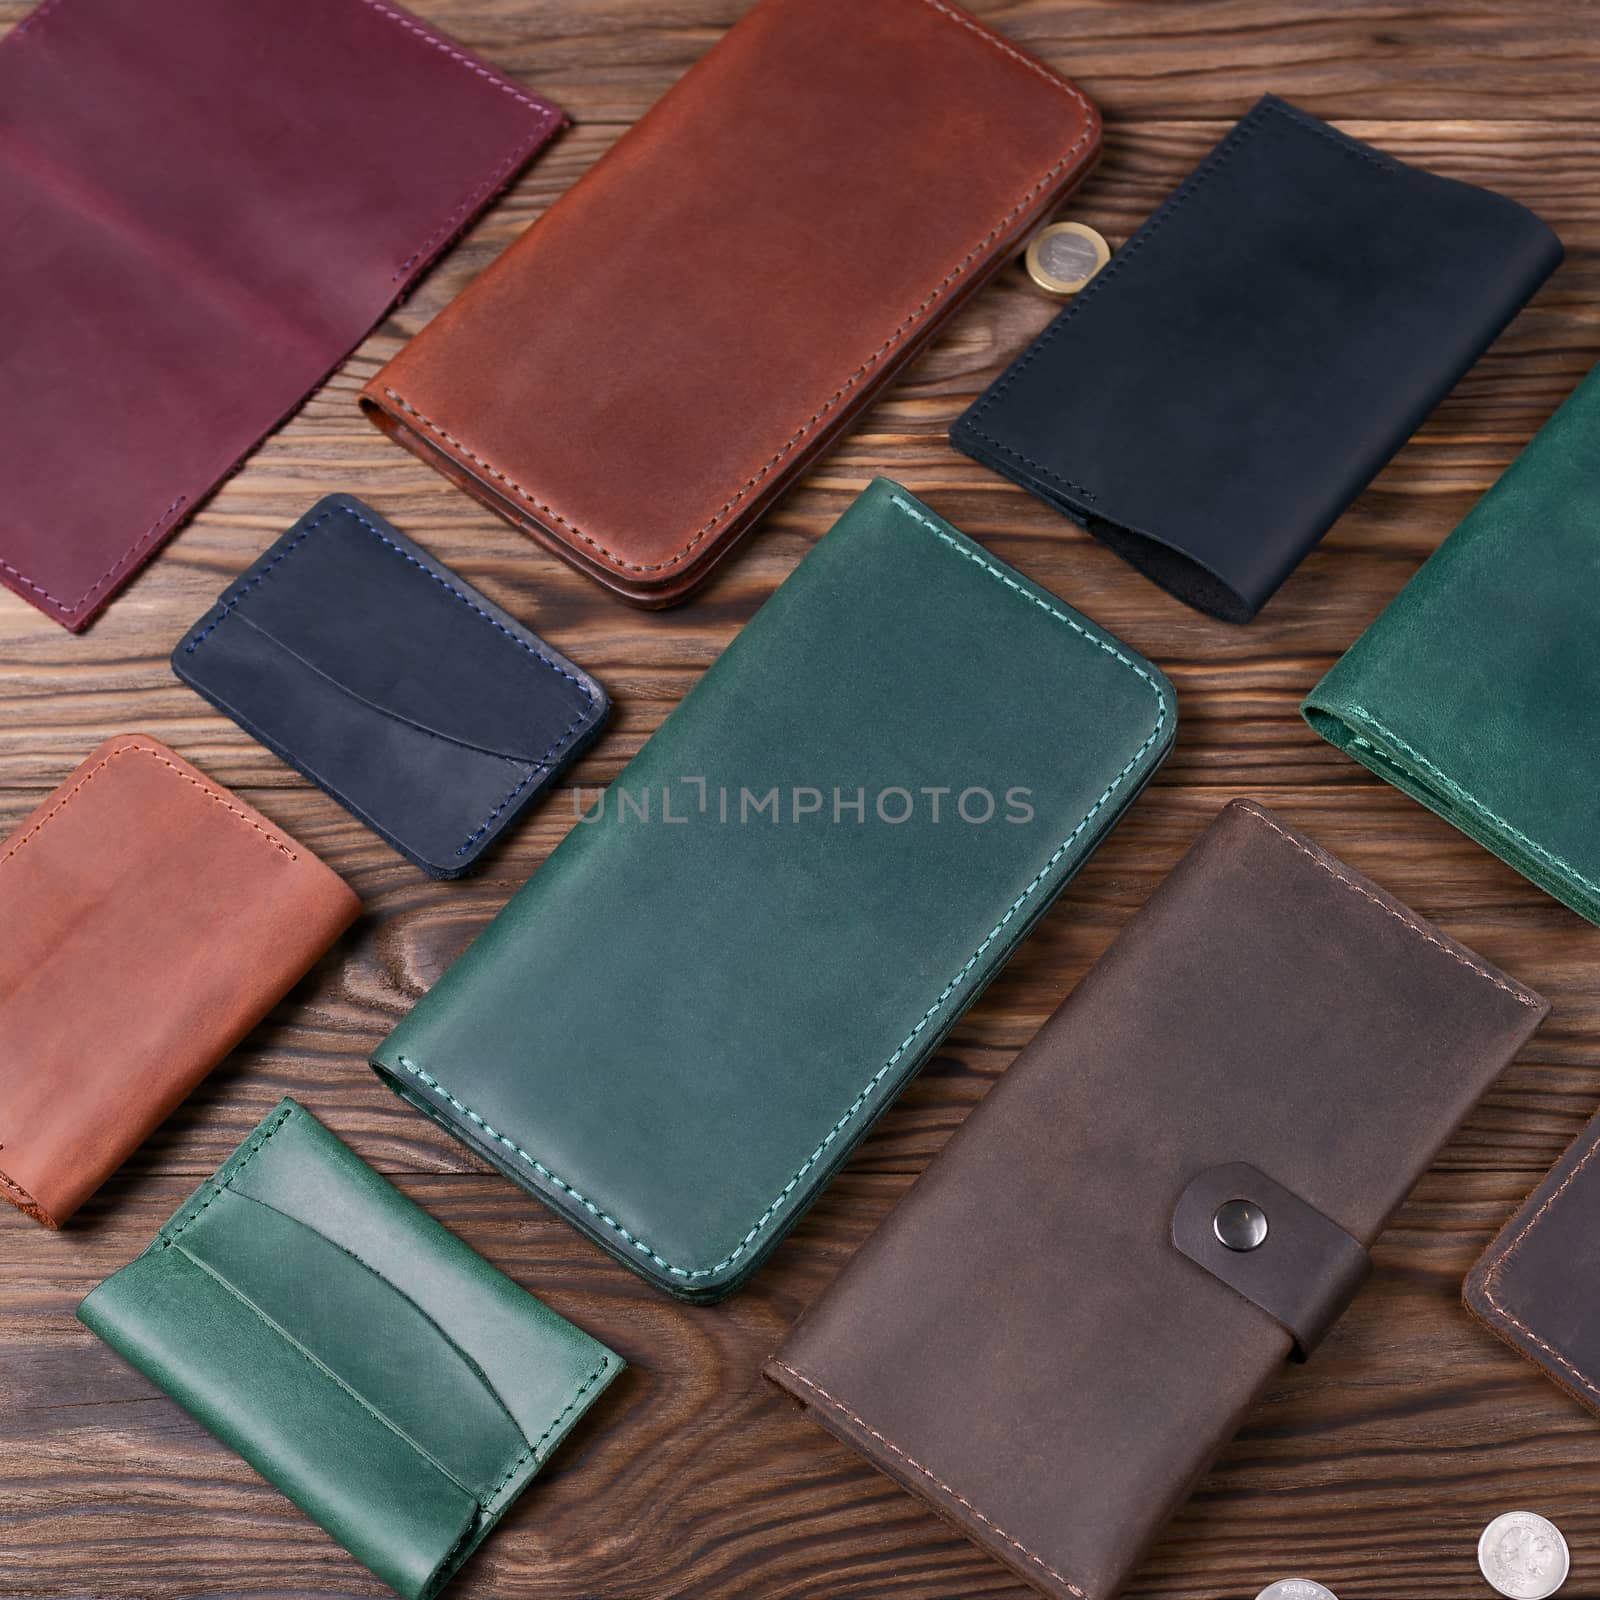 Green color handmade leather porte-monnaie surrounded by other leather accessories on wooden textured background.  Side view. Stock photo of luxury accessories.